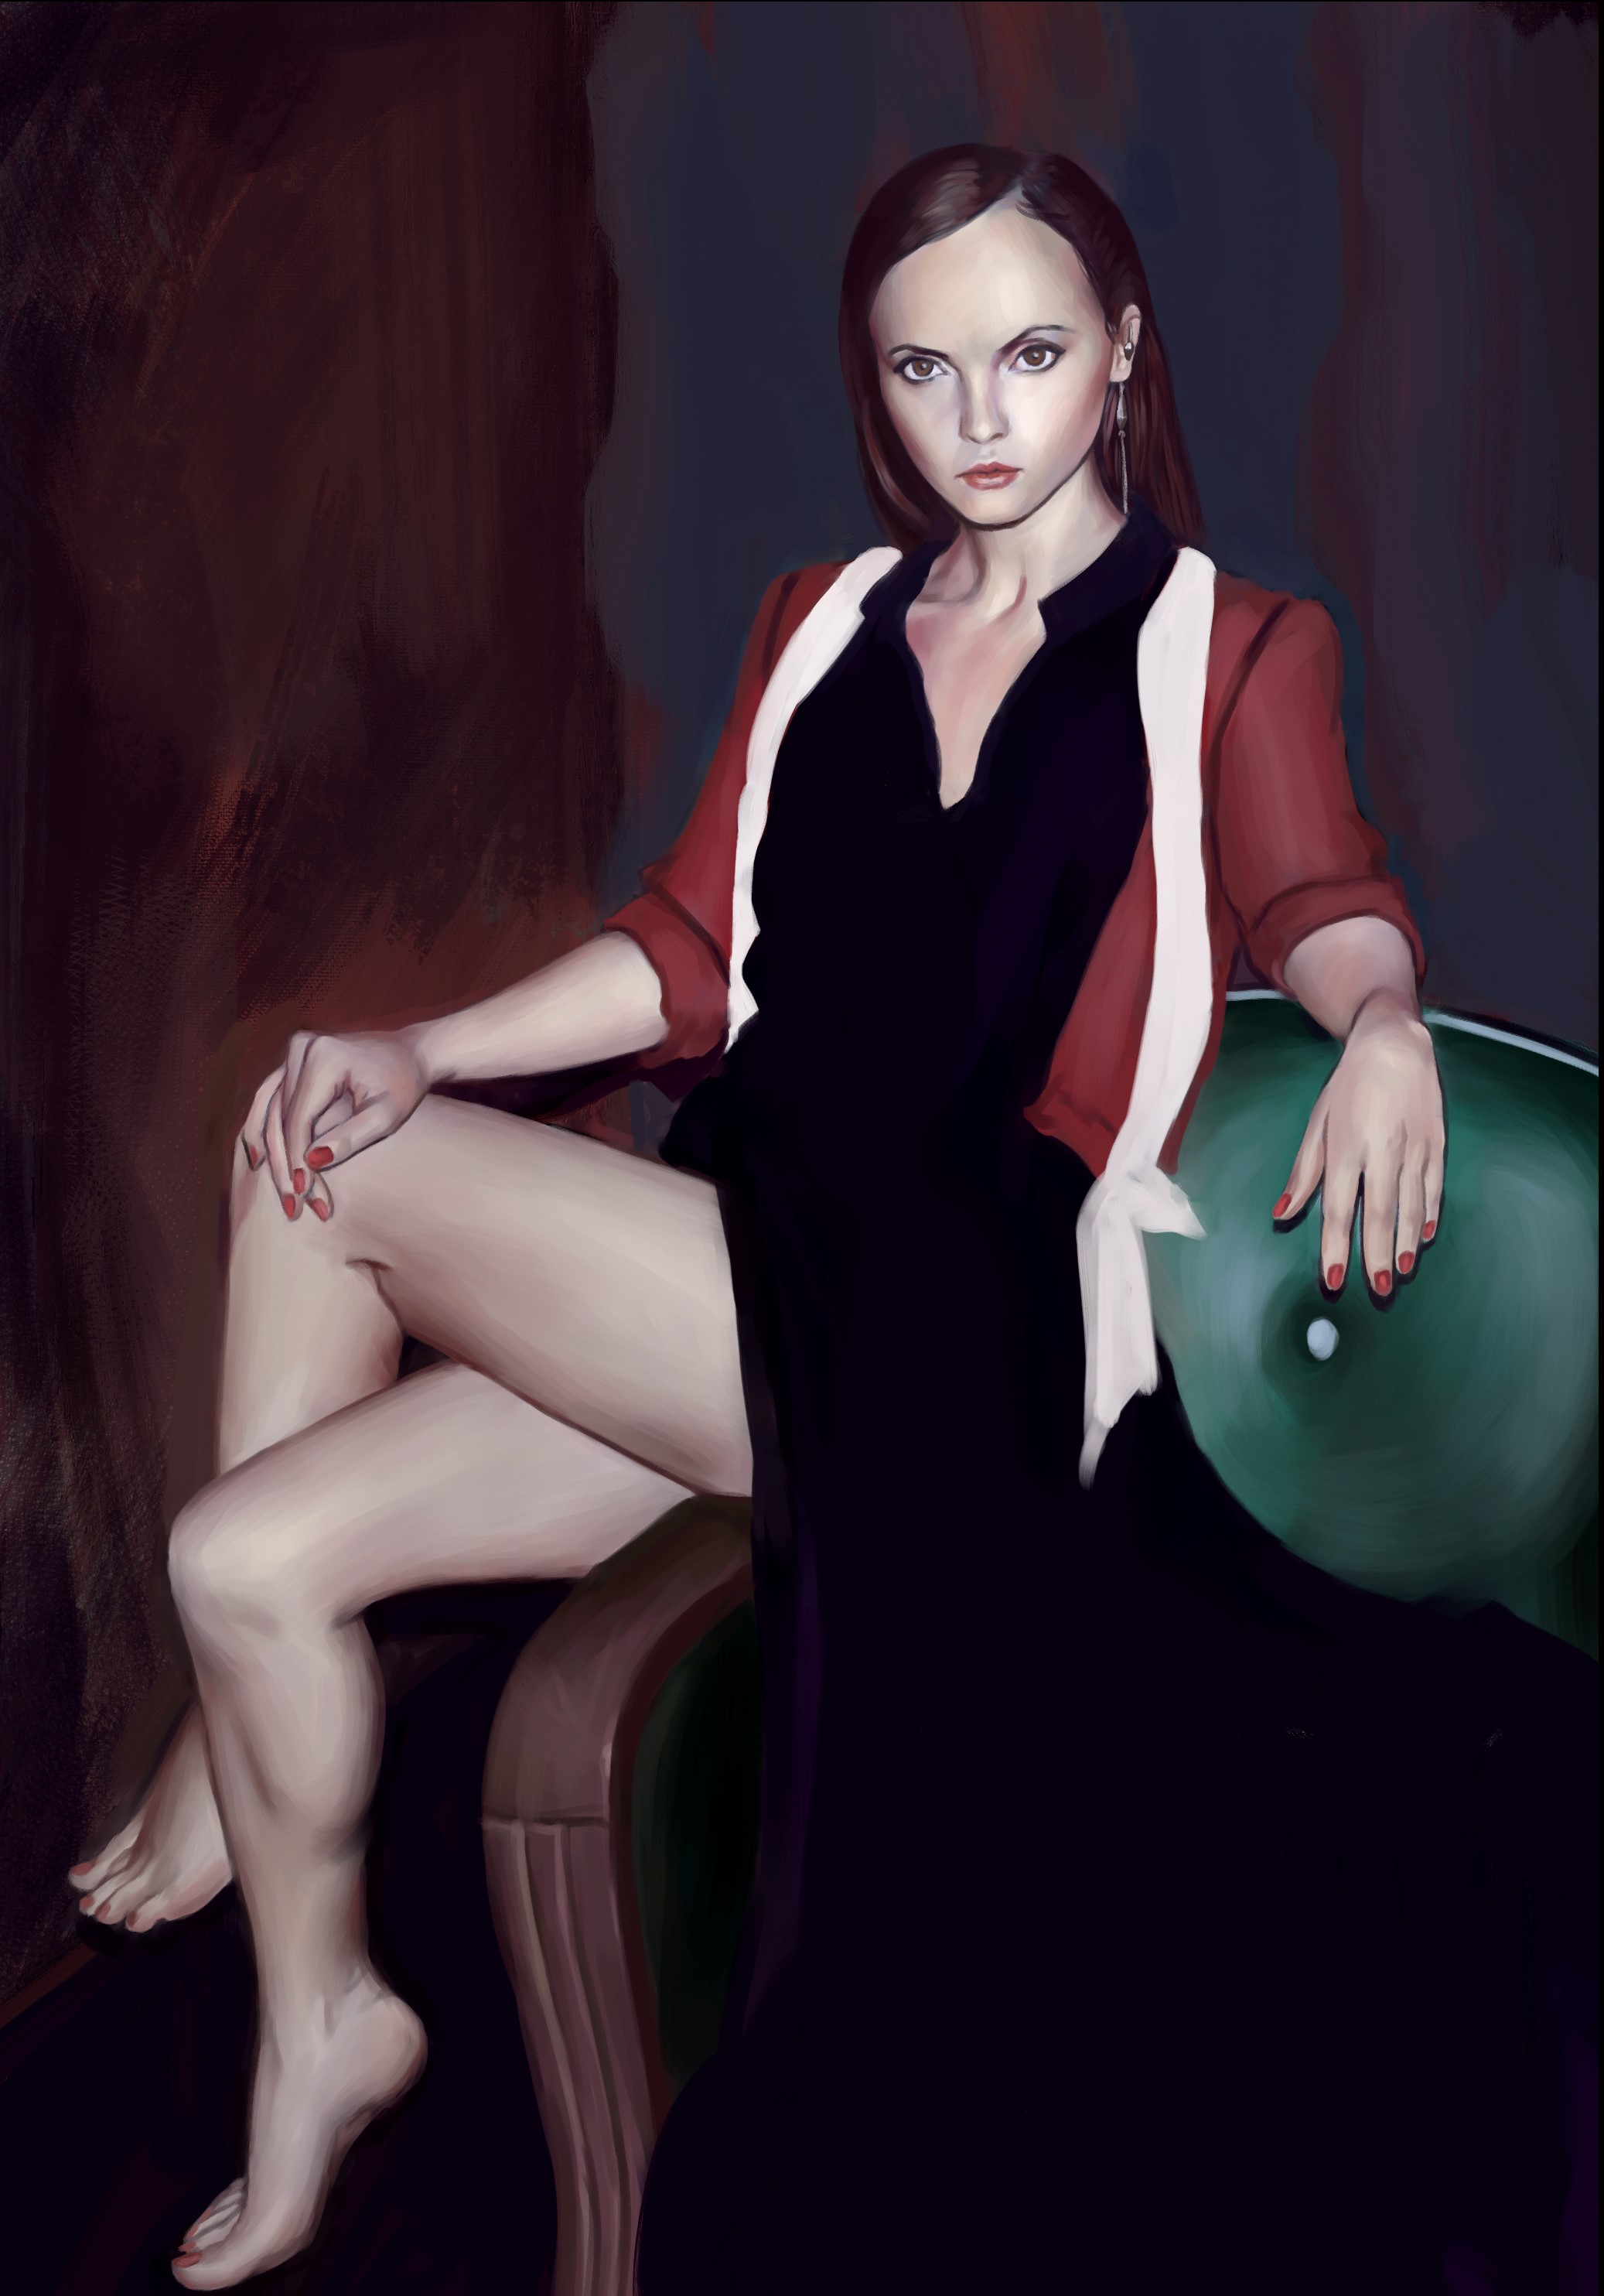 General 2074x2968 Christina Ricci artwork women actress sitting thighs legs barefoot red nails painted nails looking at viewer legs crossed digital art portrait display